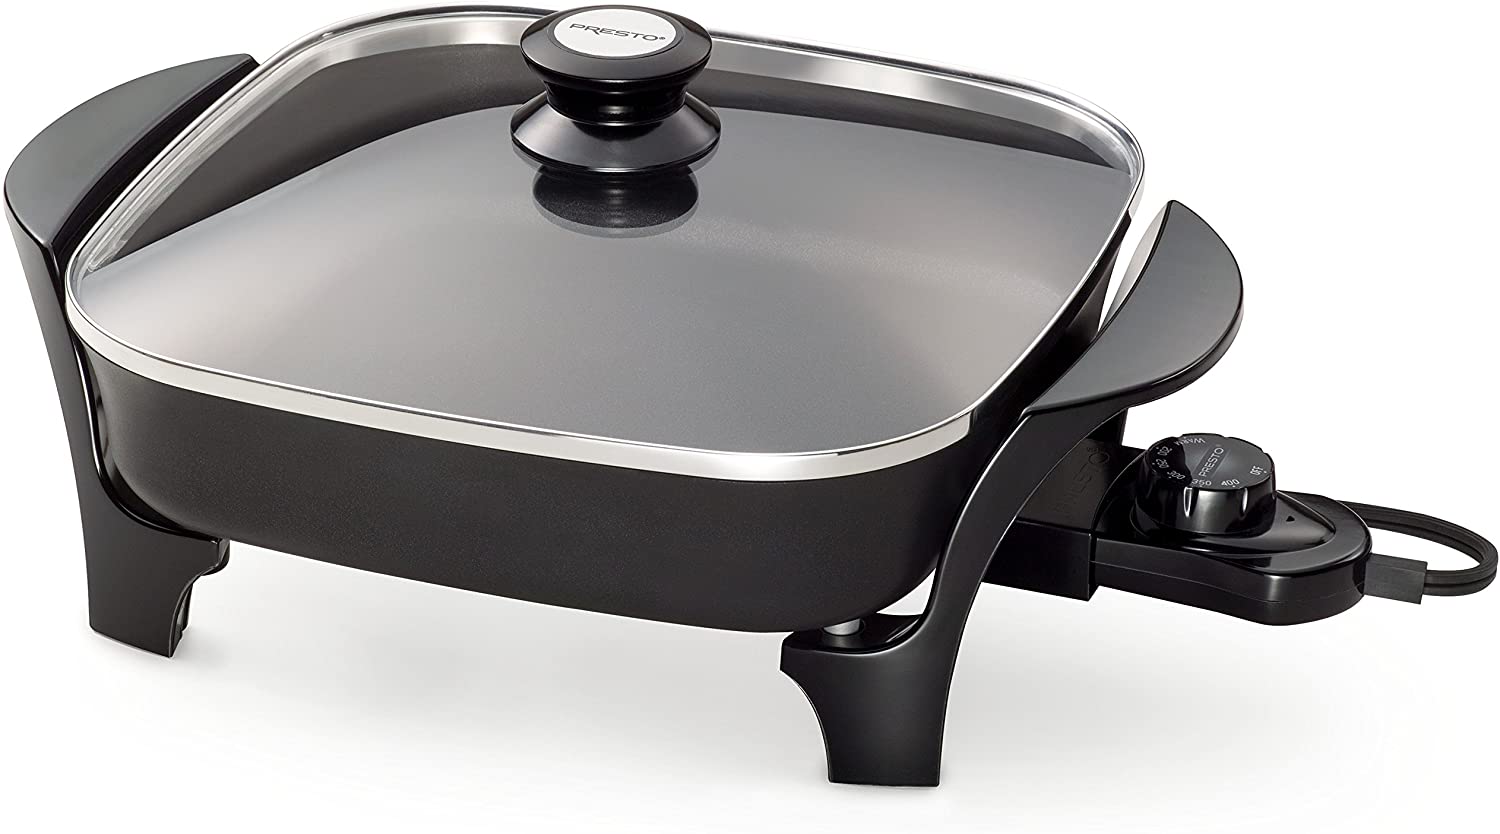 Angle View: Presto 11" Electric Skillet with Glass Cover